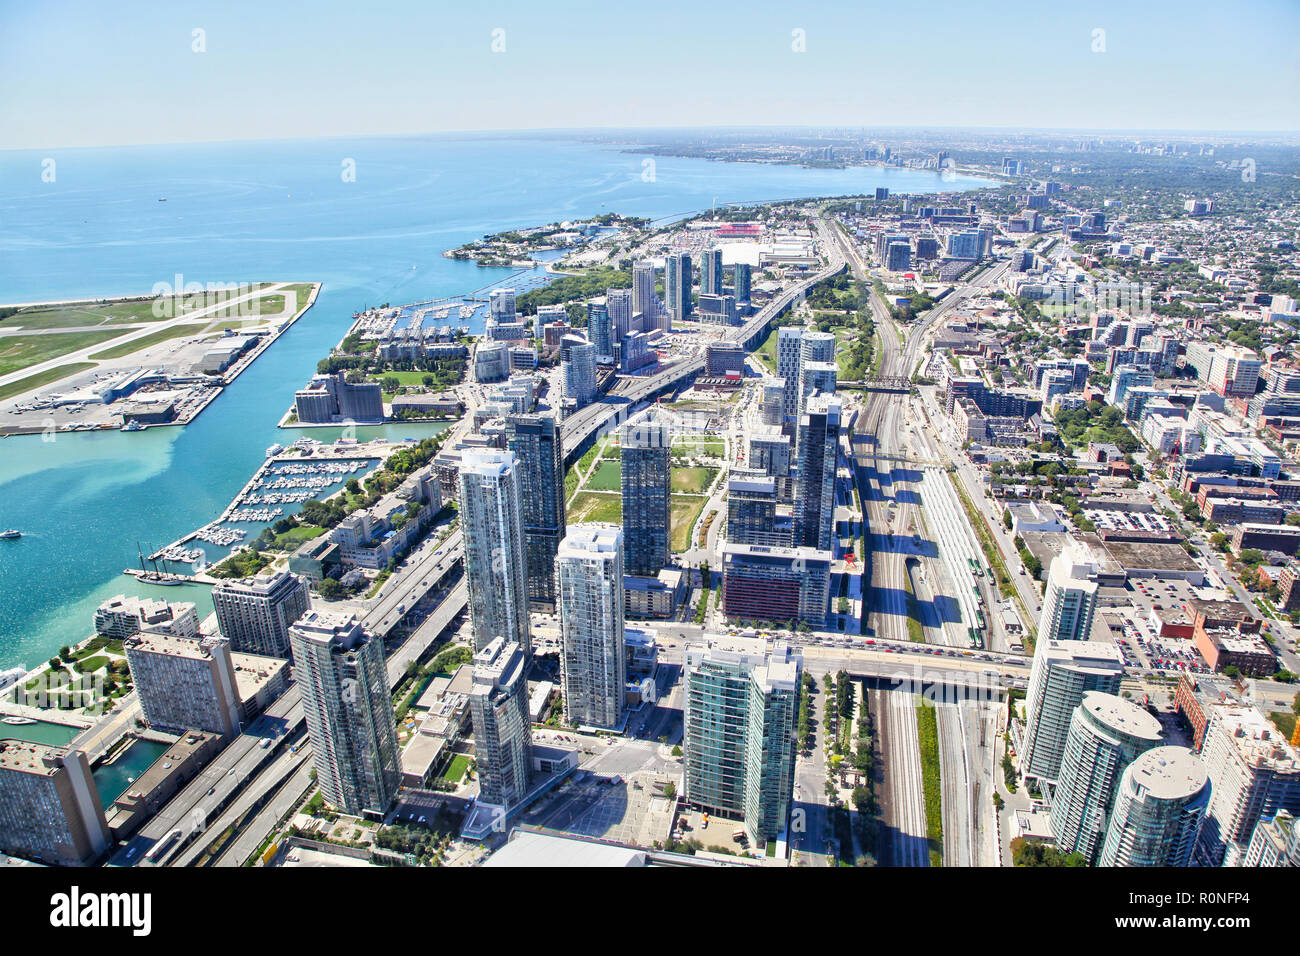 Aerial view of the Toronto's harbourfront cityscape with freeways and Billy Bishop Airport on Toronto Islands on Lake Ontario. Stock Photo